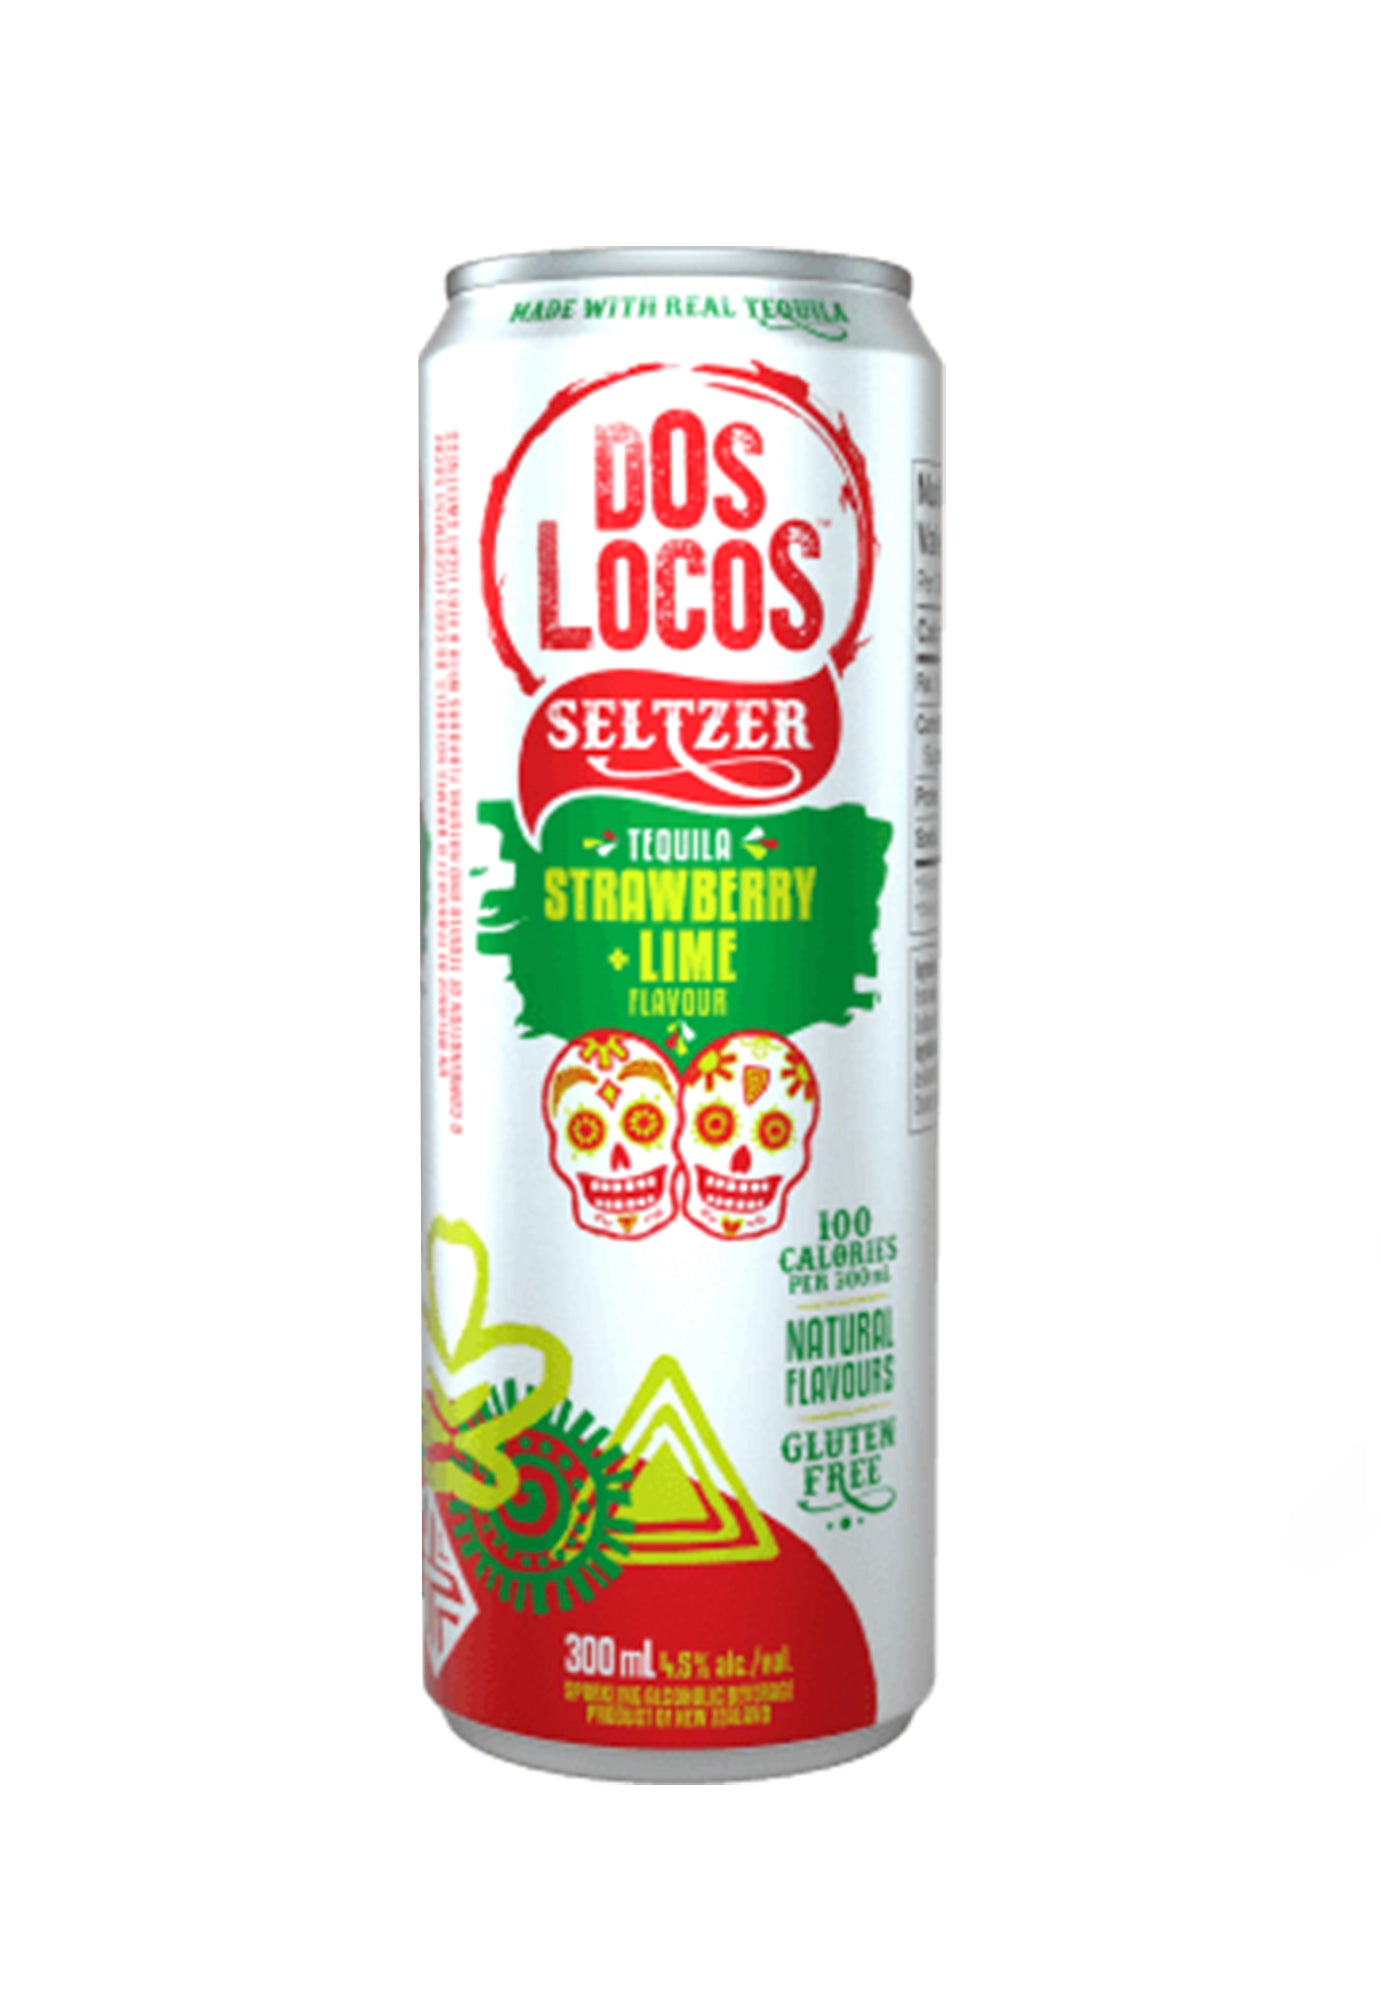 Dos Locos Strawberry & Lime Tequila Seltzer 300 ml - 4 Cans